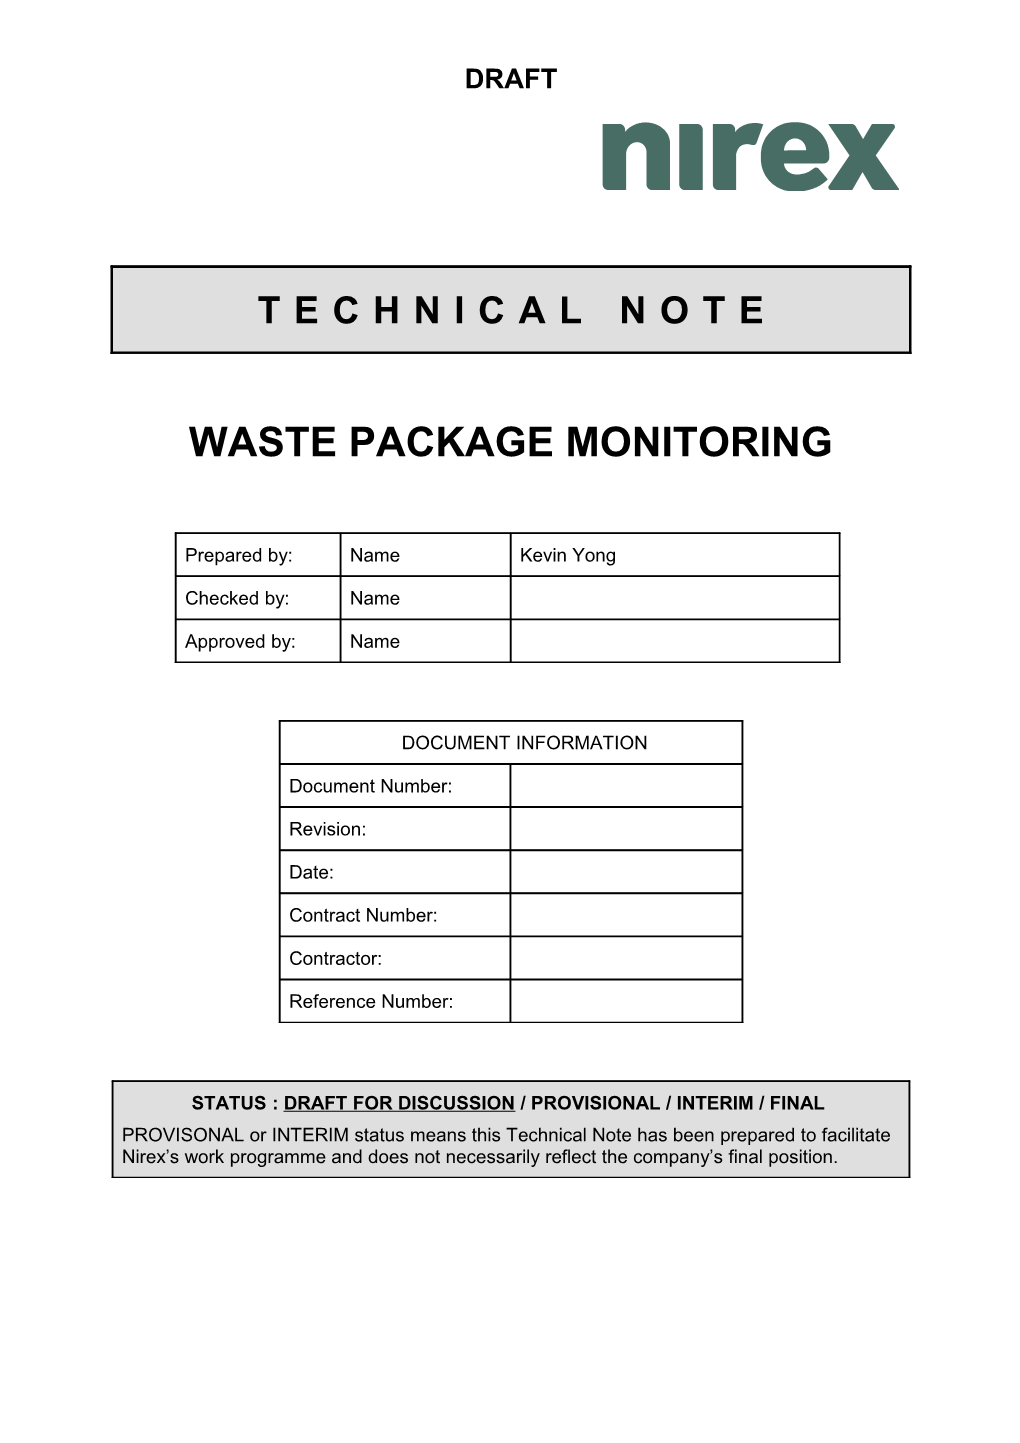 Waste Package Monitoring